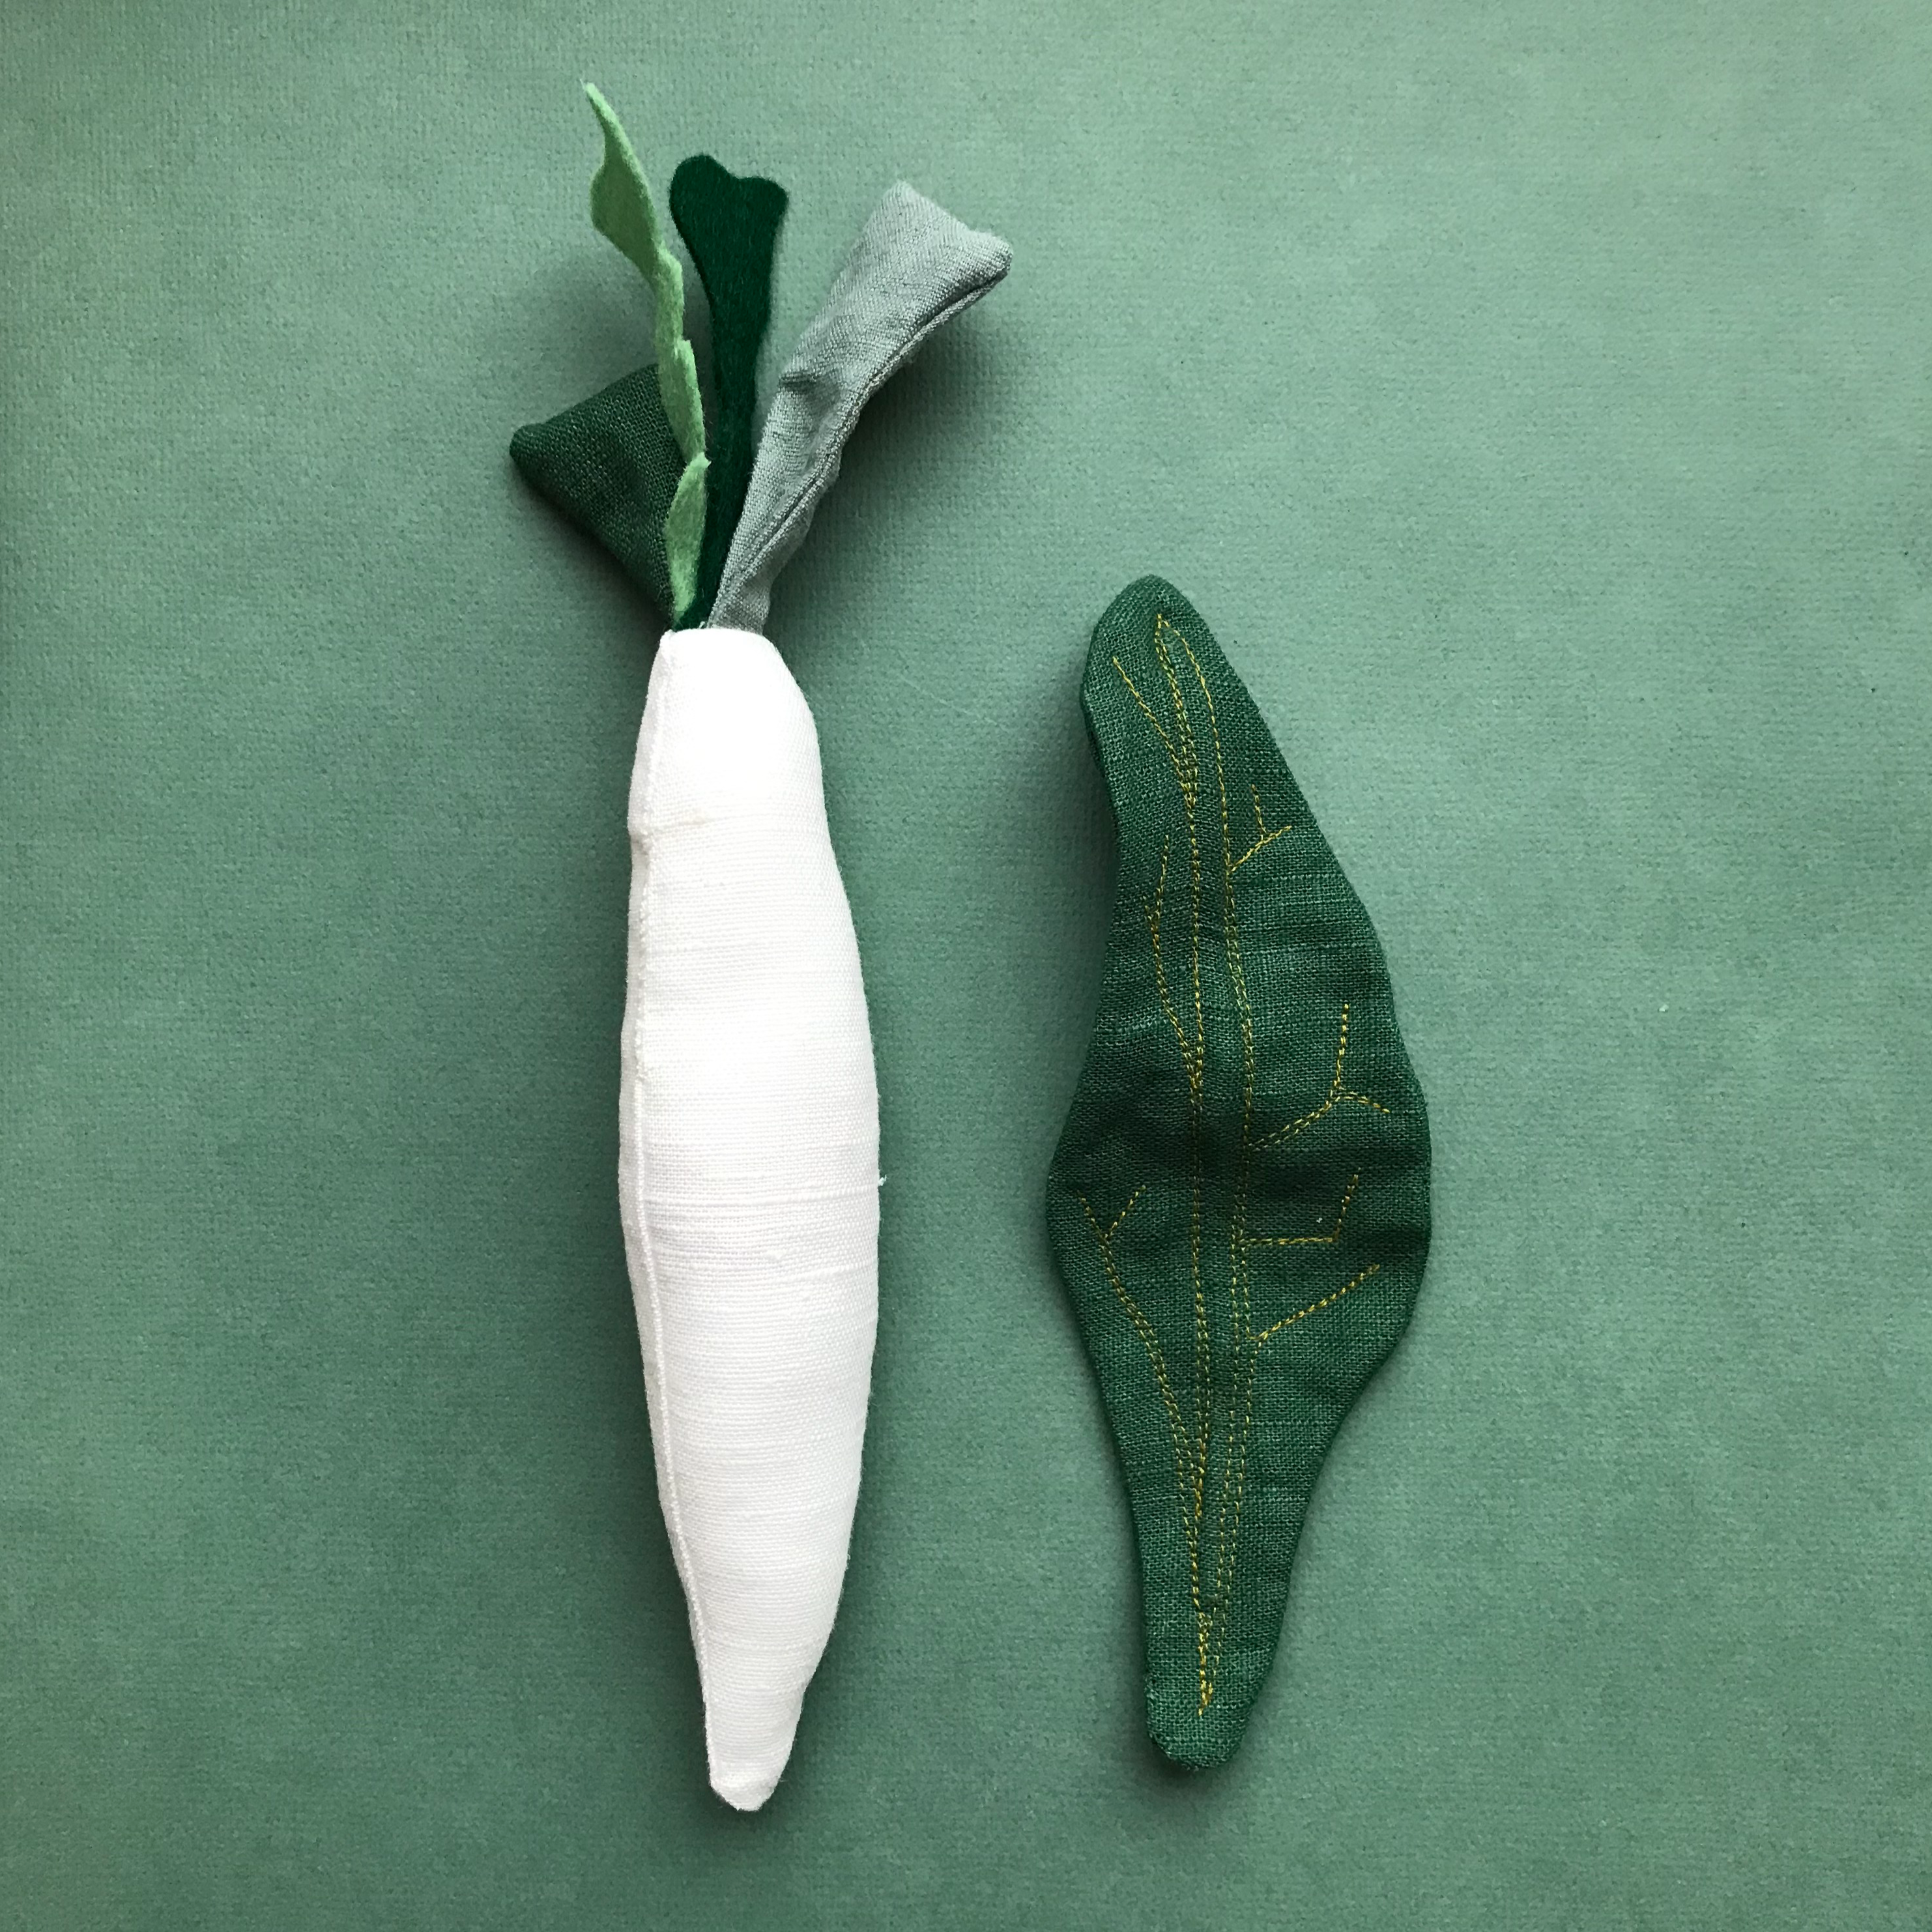 Daikon or spinach vegetable